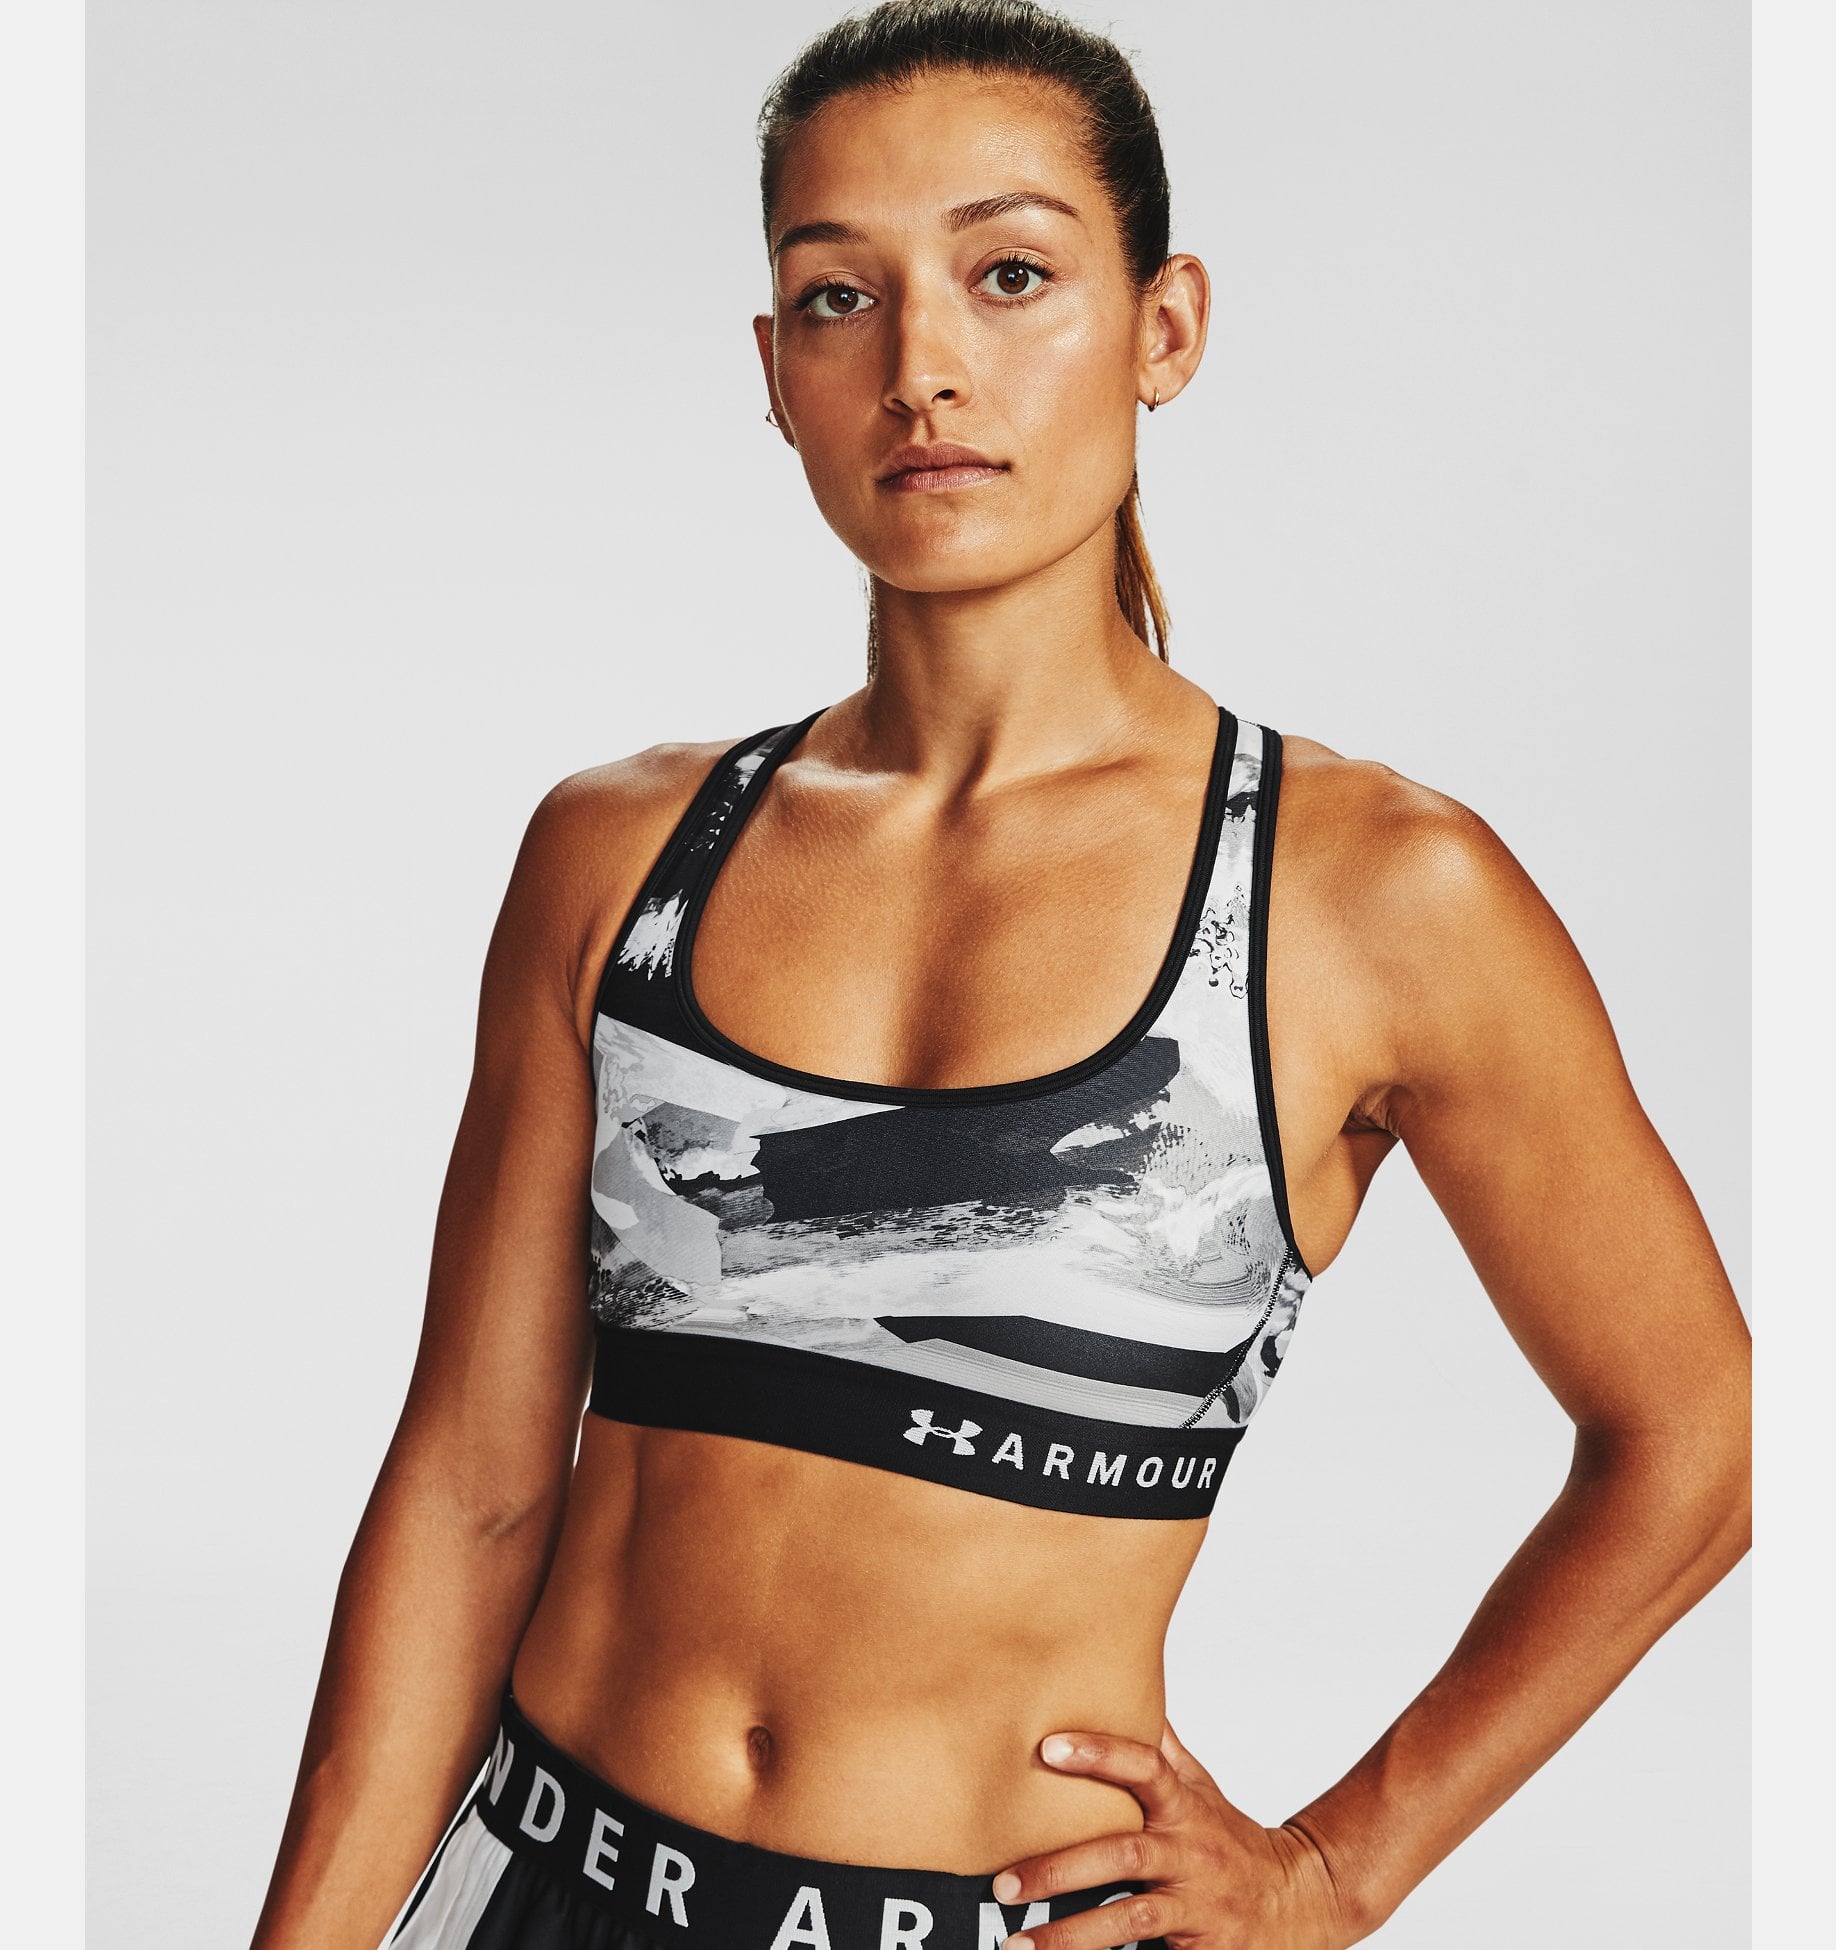 Under Armour Women's Mid Sports Bra with Cups